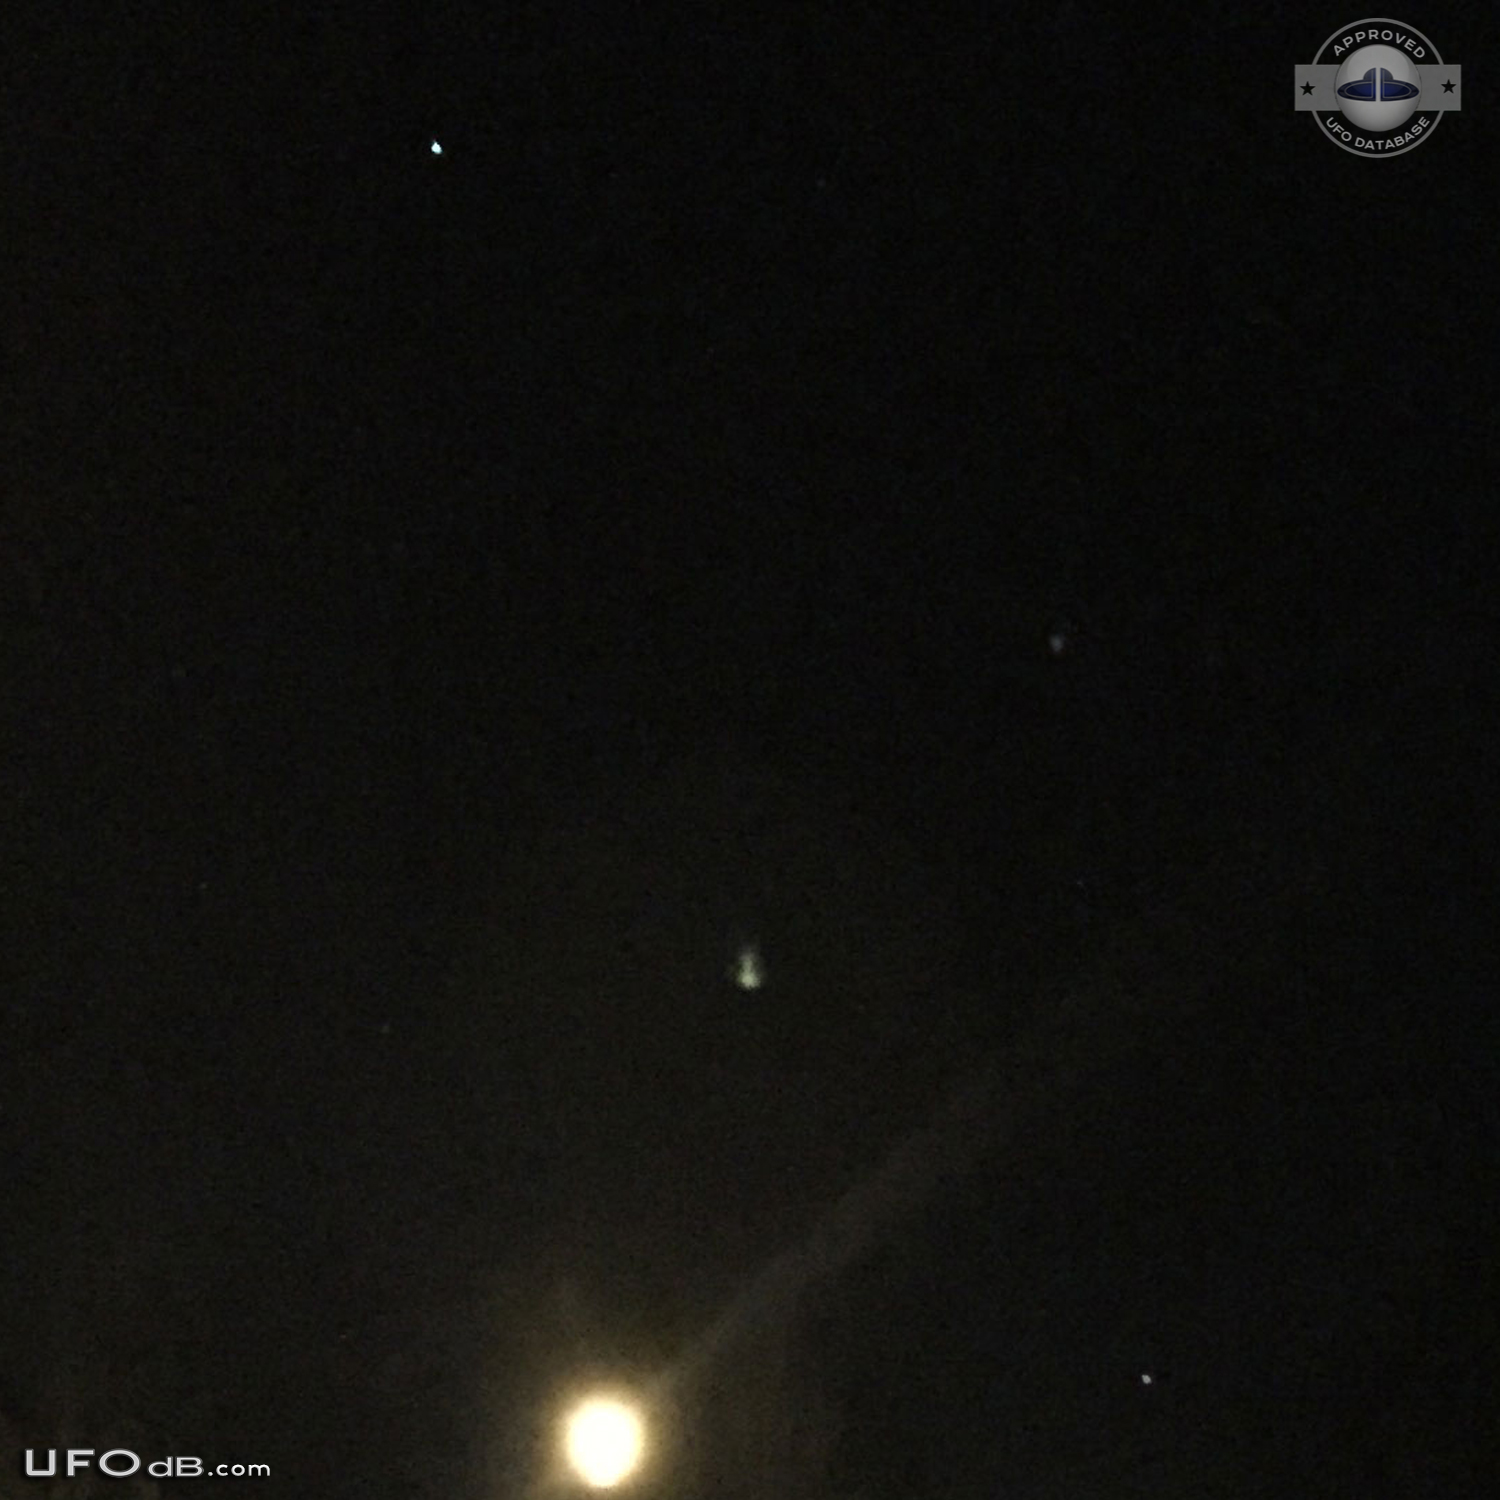 Two very very bright lights UFOs in the sky of Lacey, Washington 2015 UFO Picture #628-2